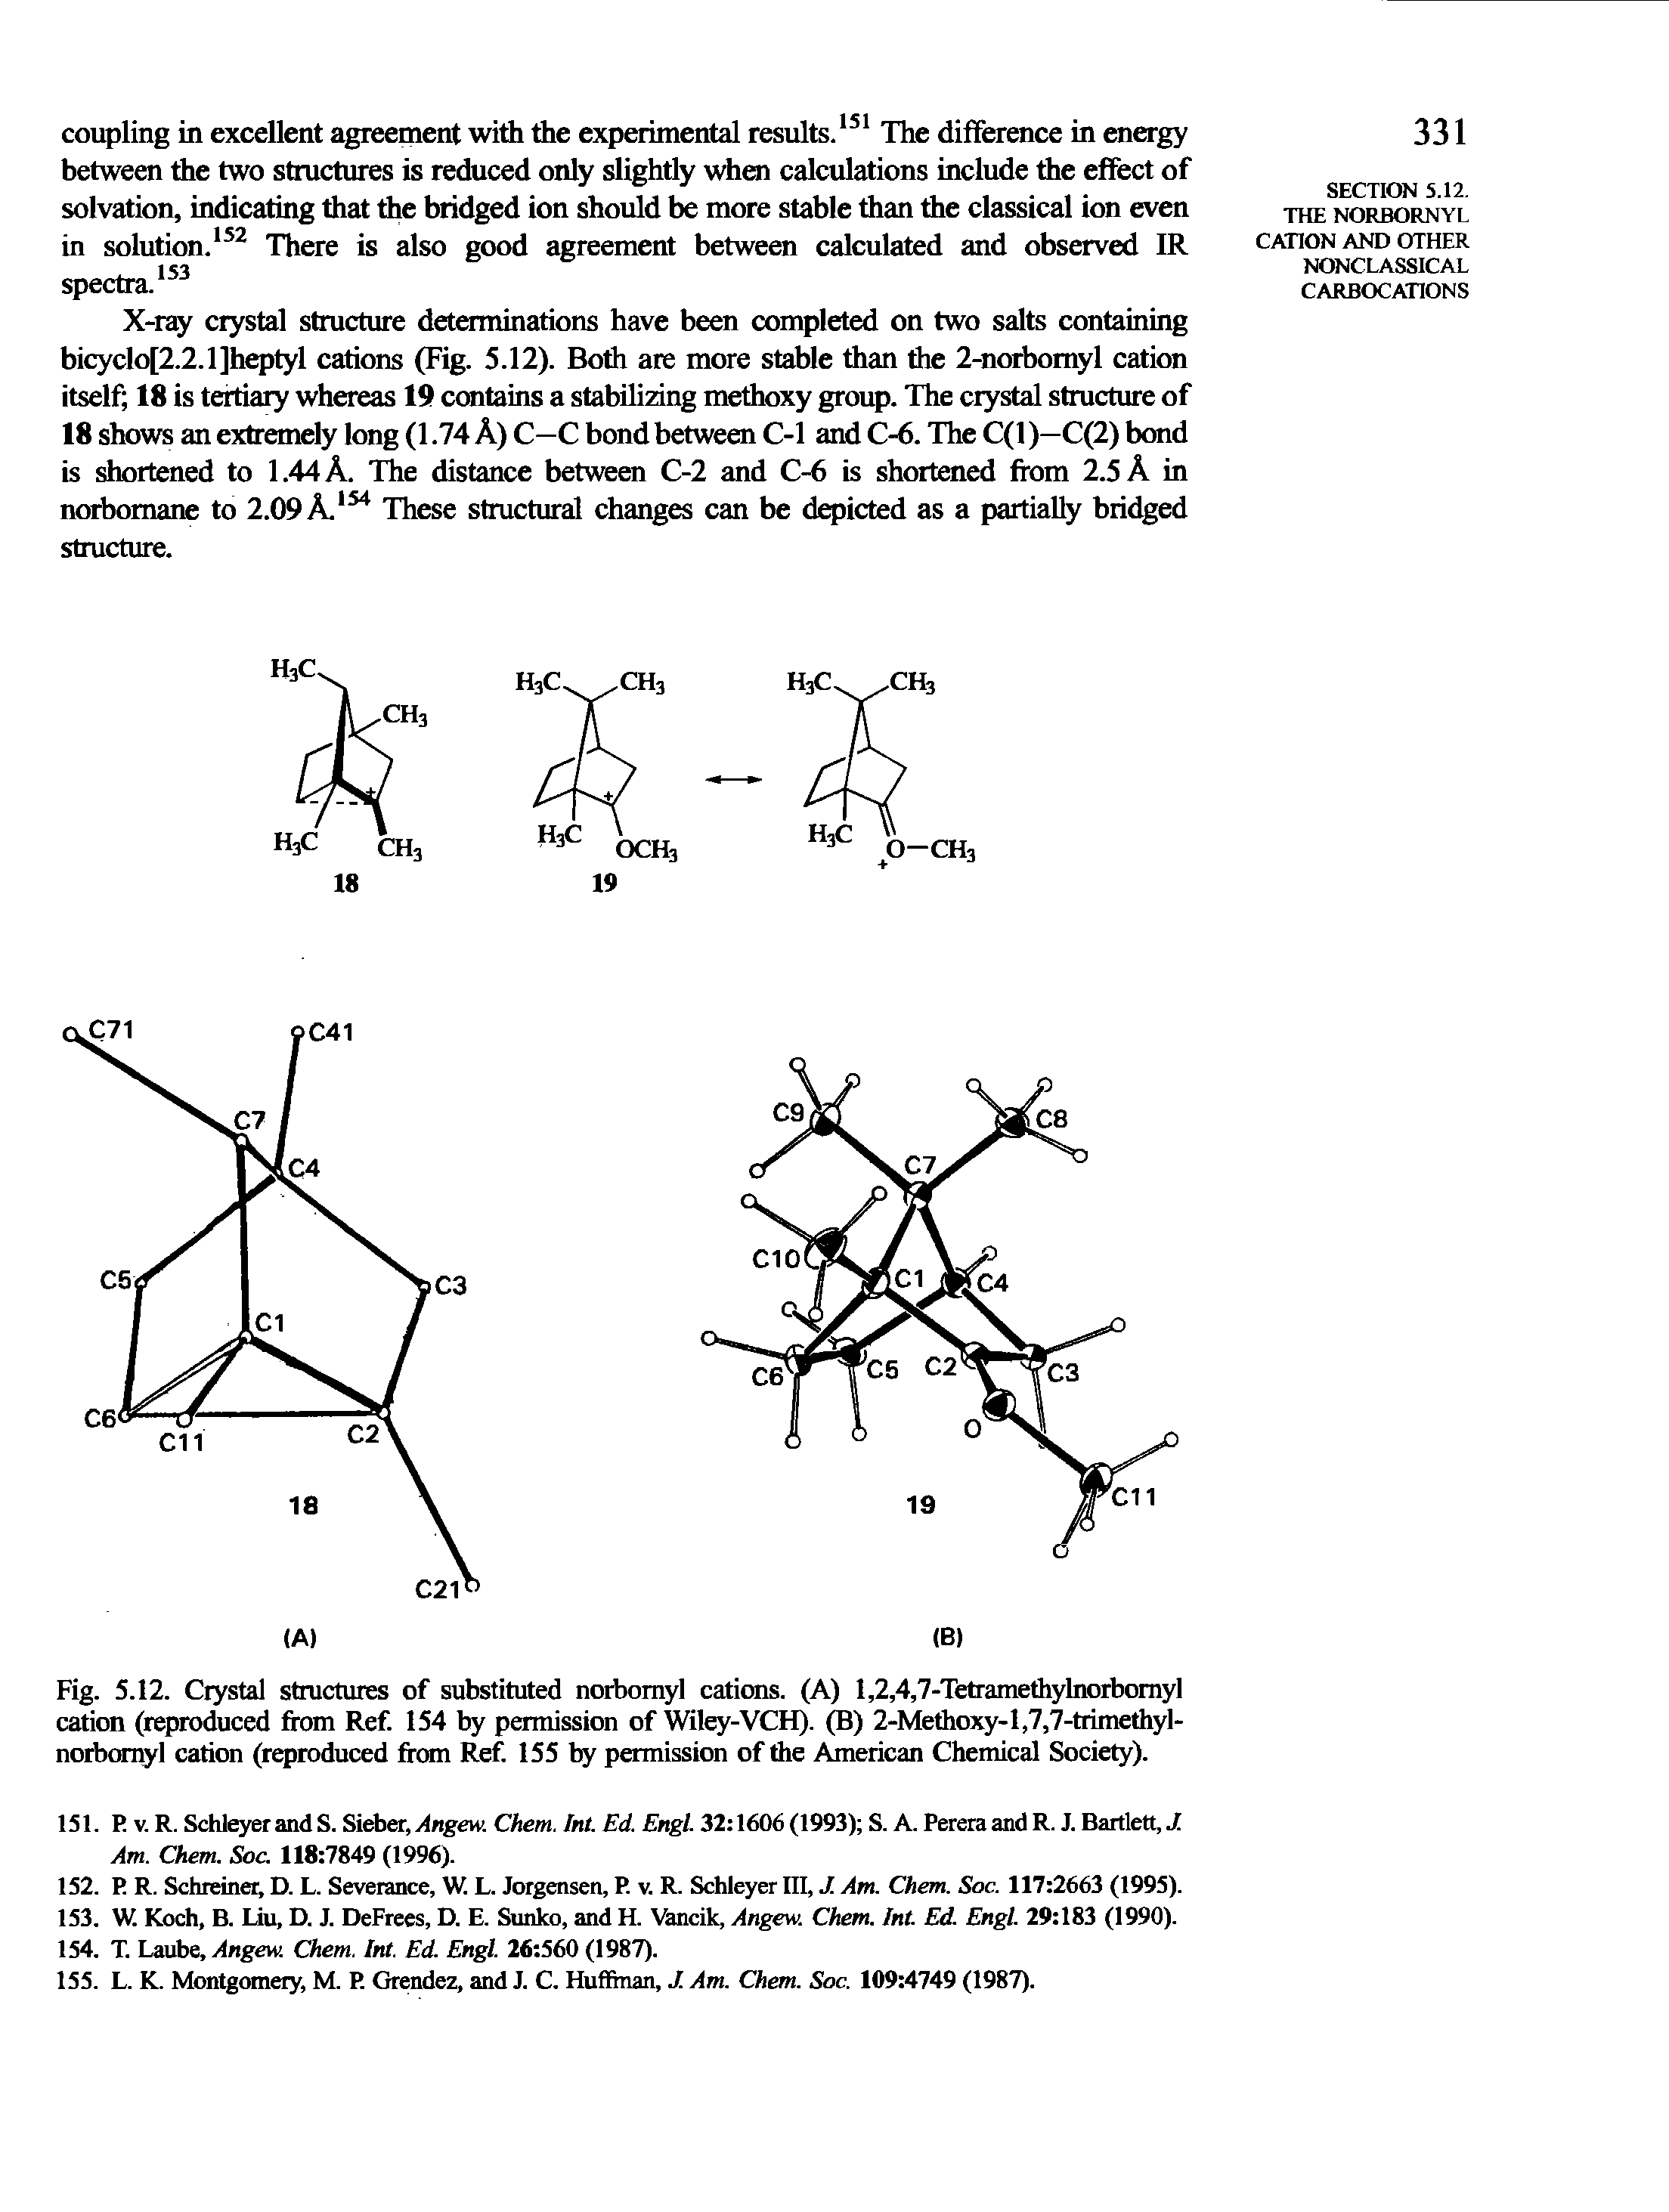 Fig. 5.12. Crystal structures of substituted norbomyl cations. (A) 1,2,4,7-Tetramethylnorbomyl cation (reproduced from Ref. 154 by permission of Wiley-VCH). (B) 2-Methoxy-l,7,7-trimethyl-norbornyl cation (reproduced from Ref 155 by permission of the American Chemical Society).